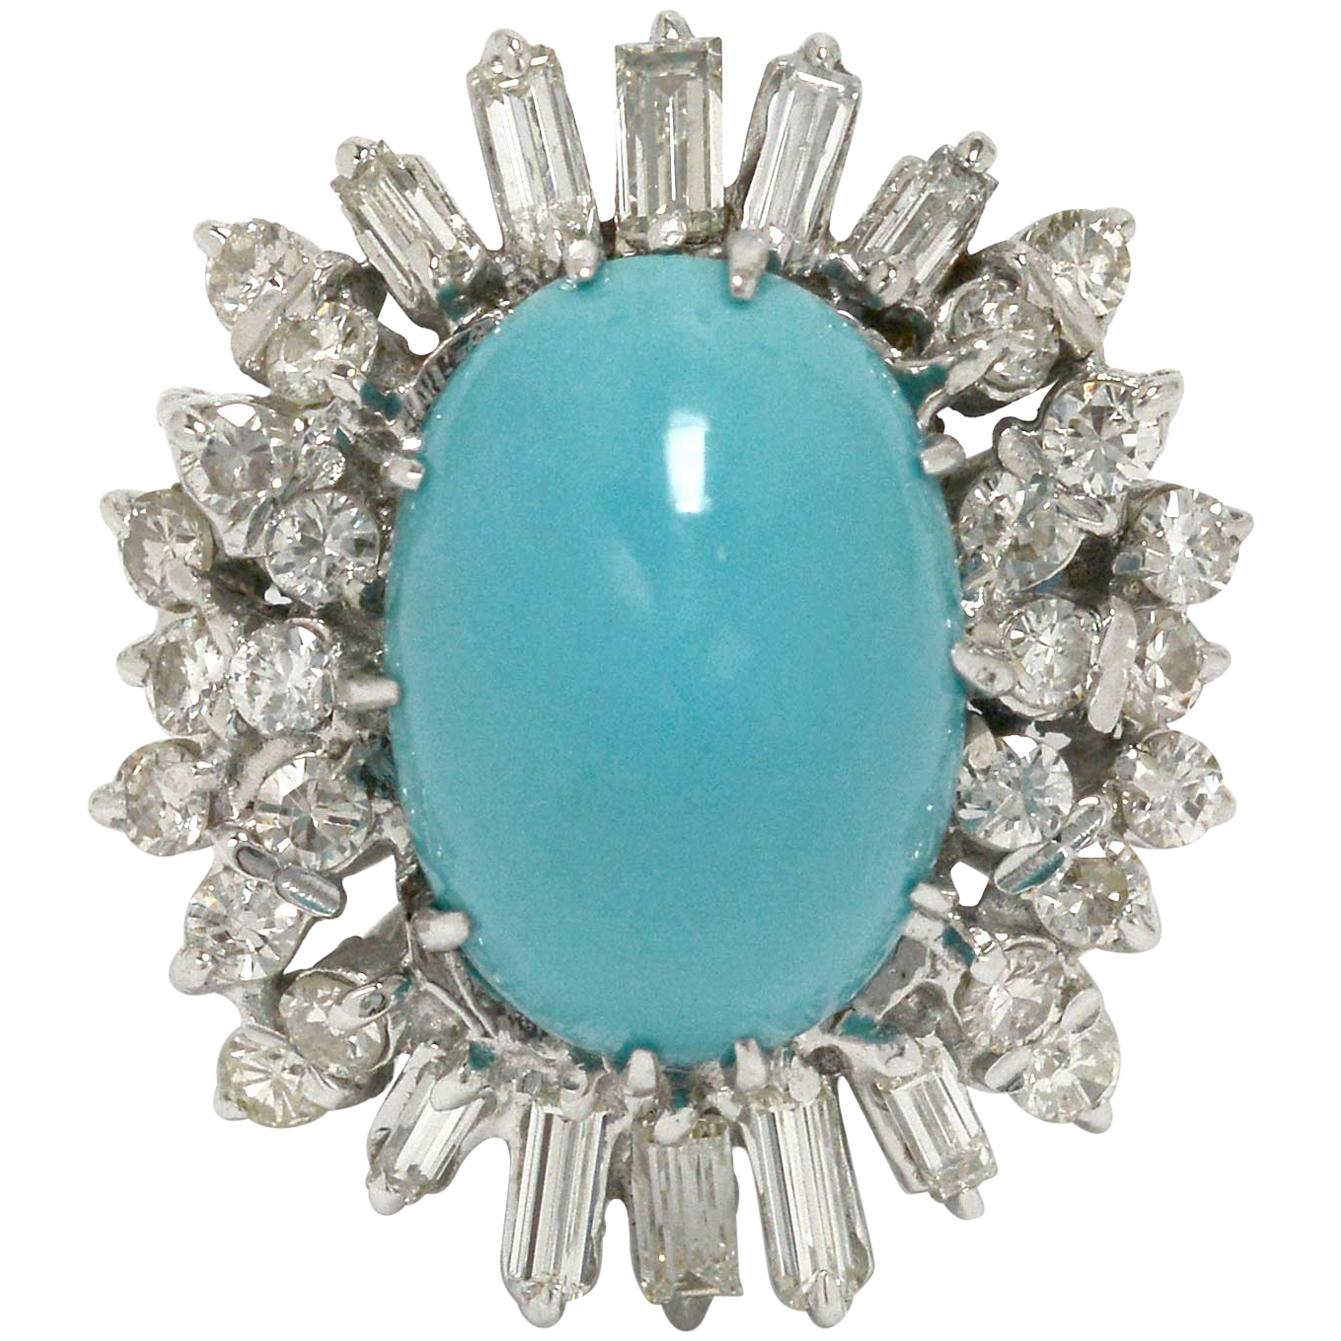 Persian Turquoise Diamond Cocktail Ring 8 Carat Oval Cabochon Dome White Gold 